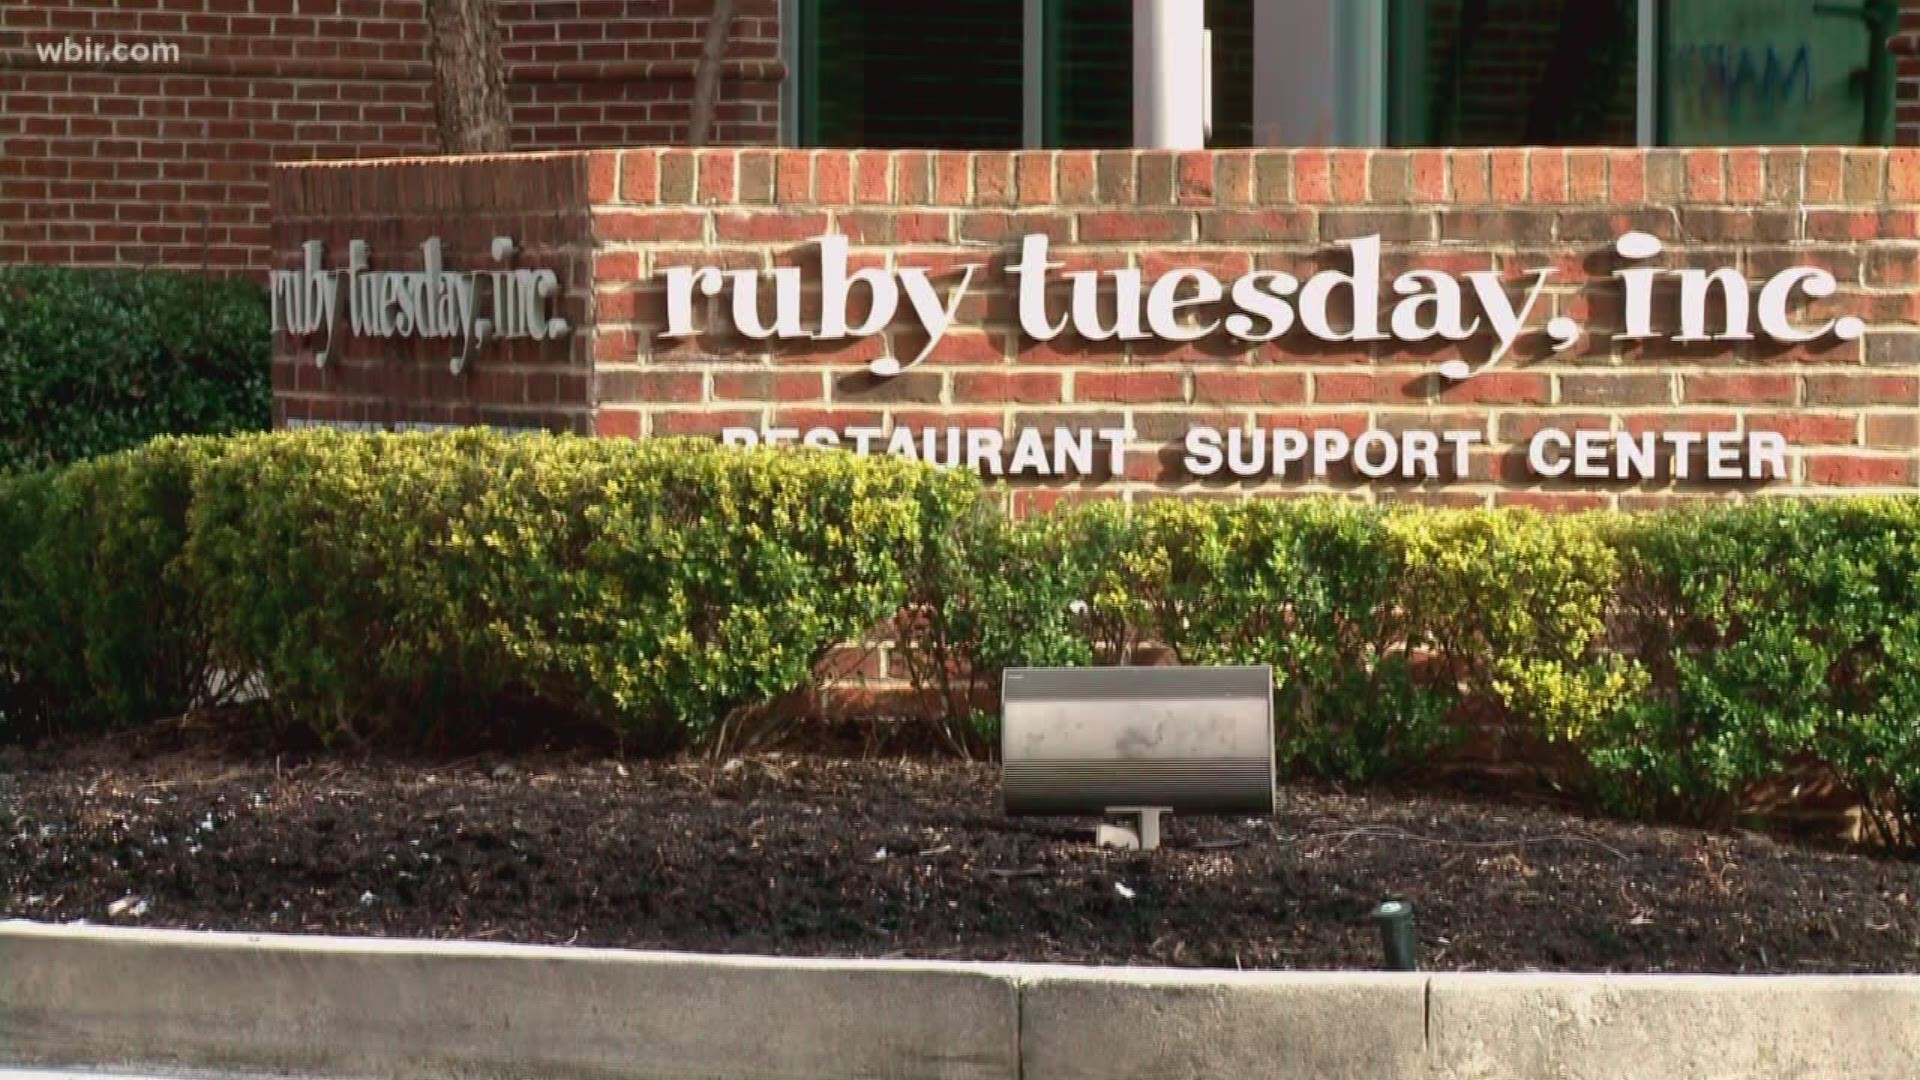 The Maryville-based restaurant chain will be under new ownership once the deal is finalized.